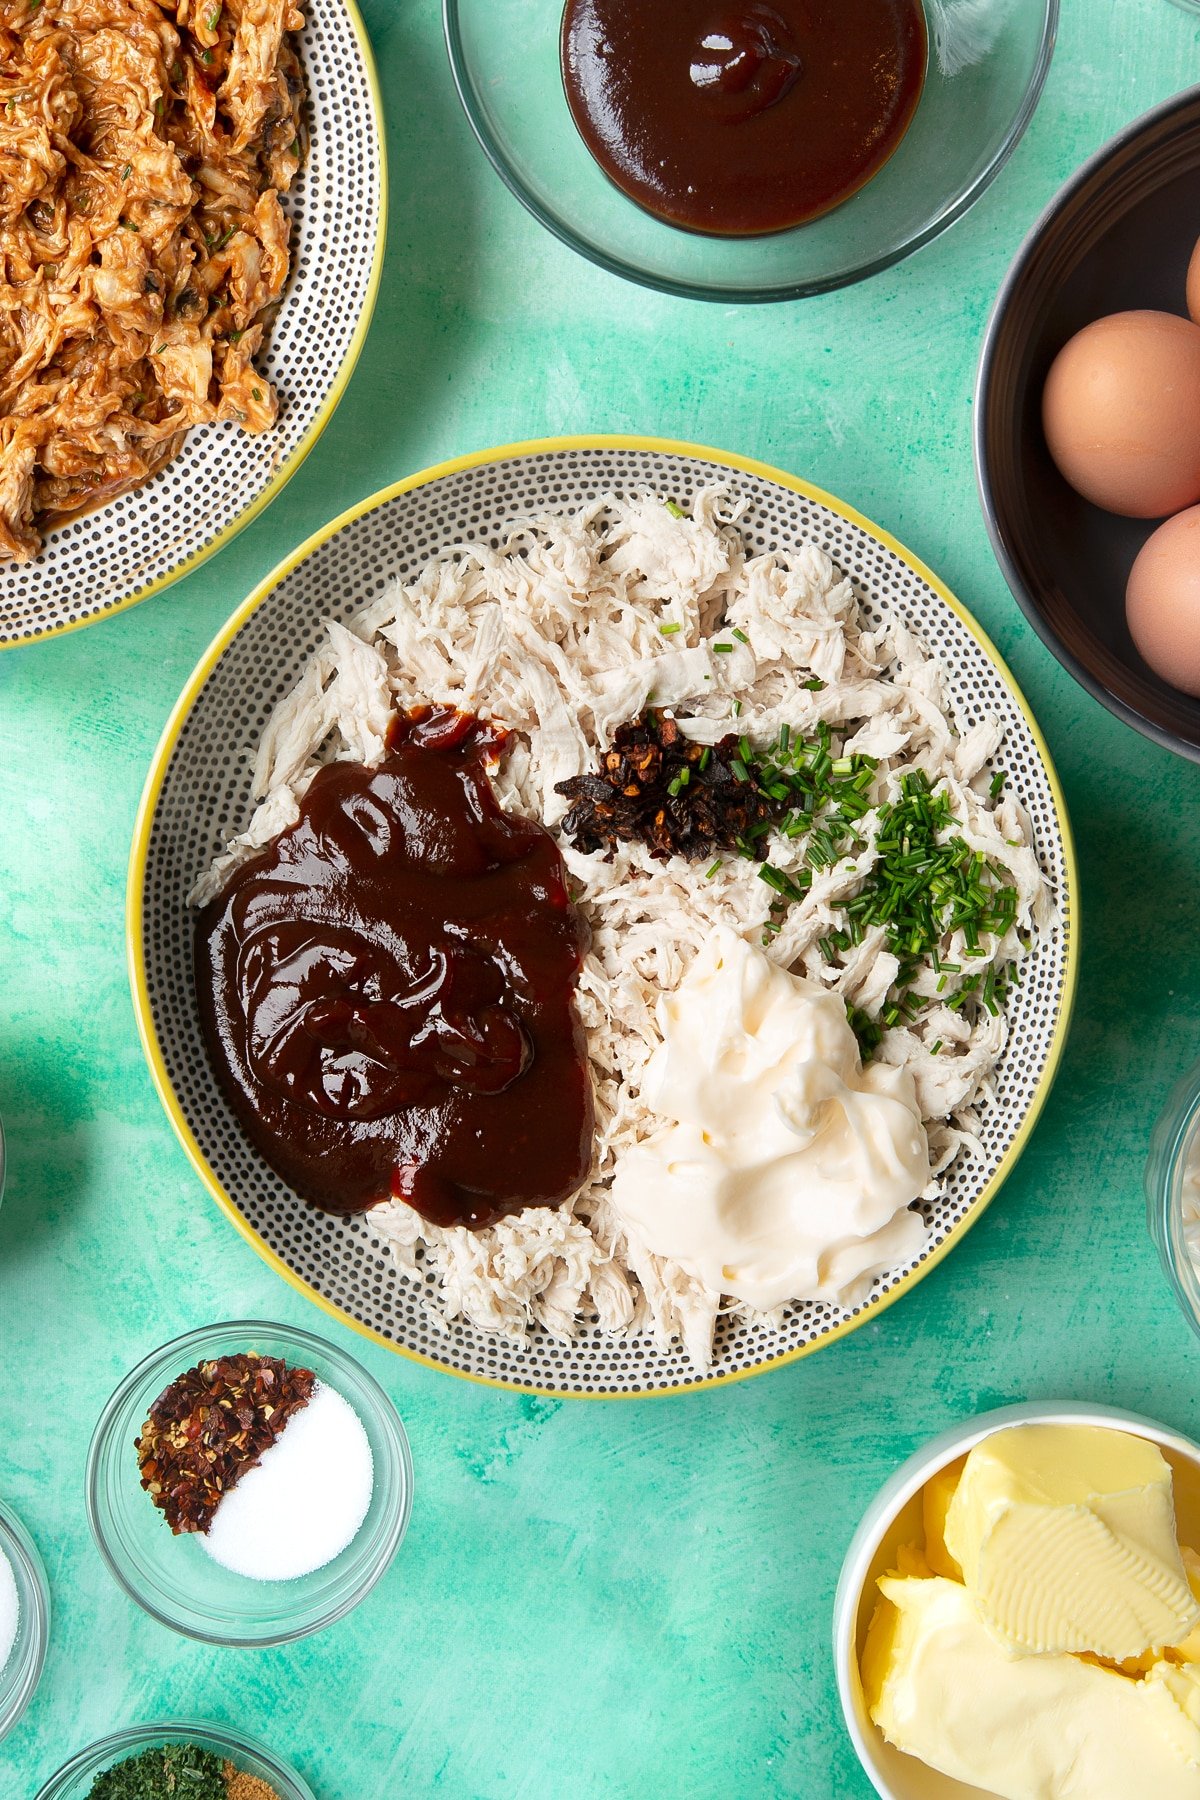 Shredded chicken breast in a bowl, topped with barbecue sauce, mayo, chilli flakes and chopped chives. Ingredients to make chicken doughnuts surround the bowl.